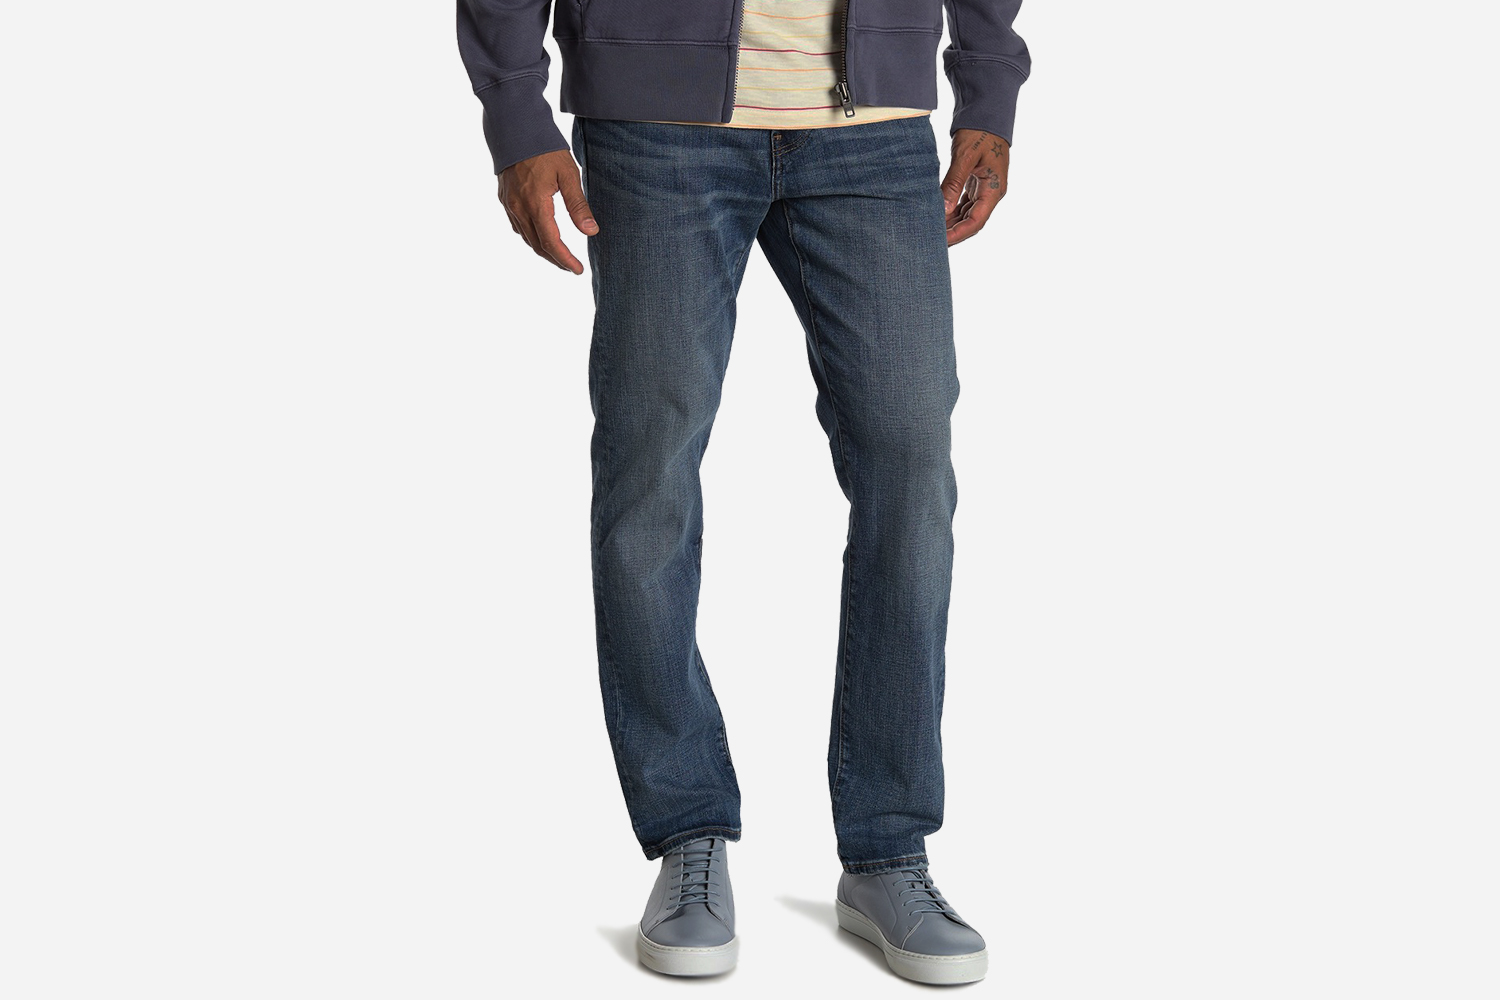 Madewell Men's Slim Fit Jeans in Erie Wash